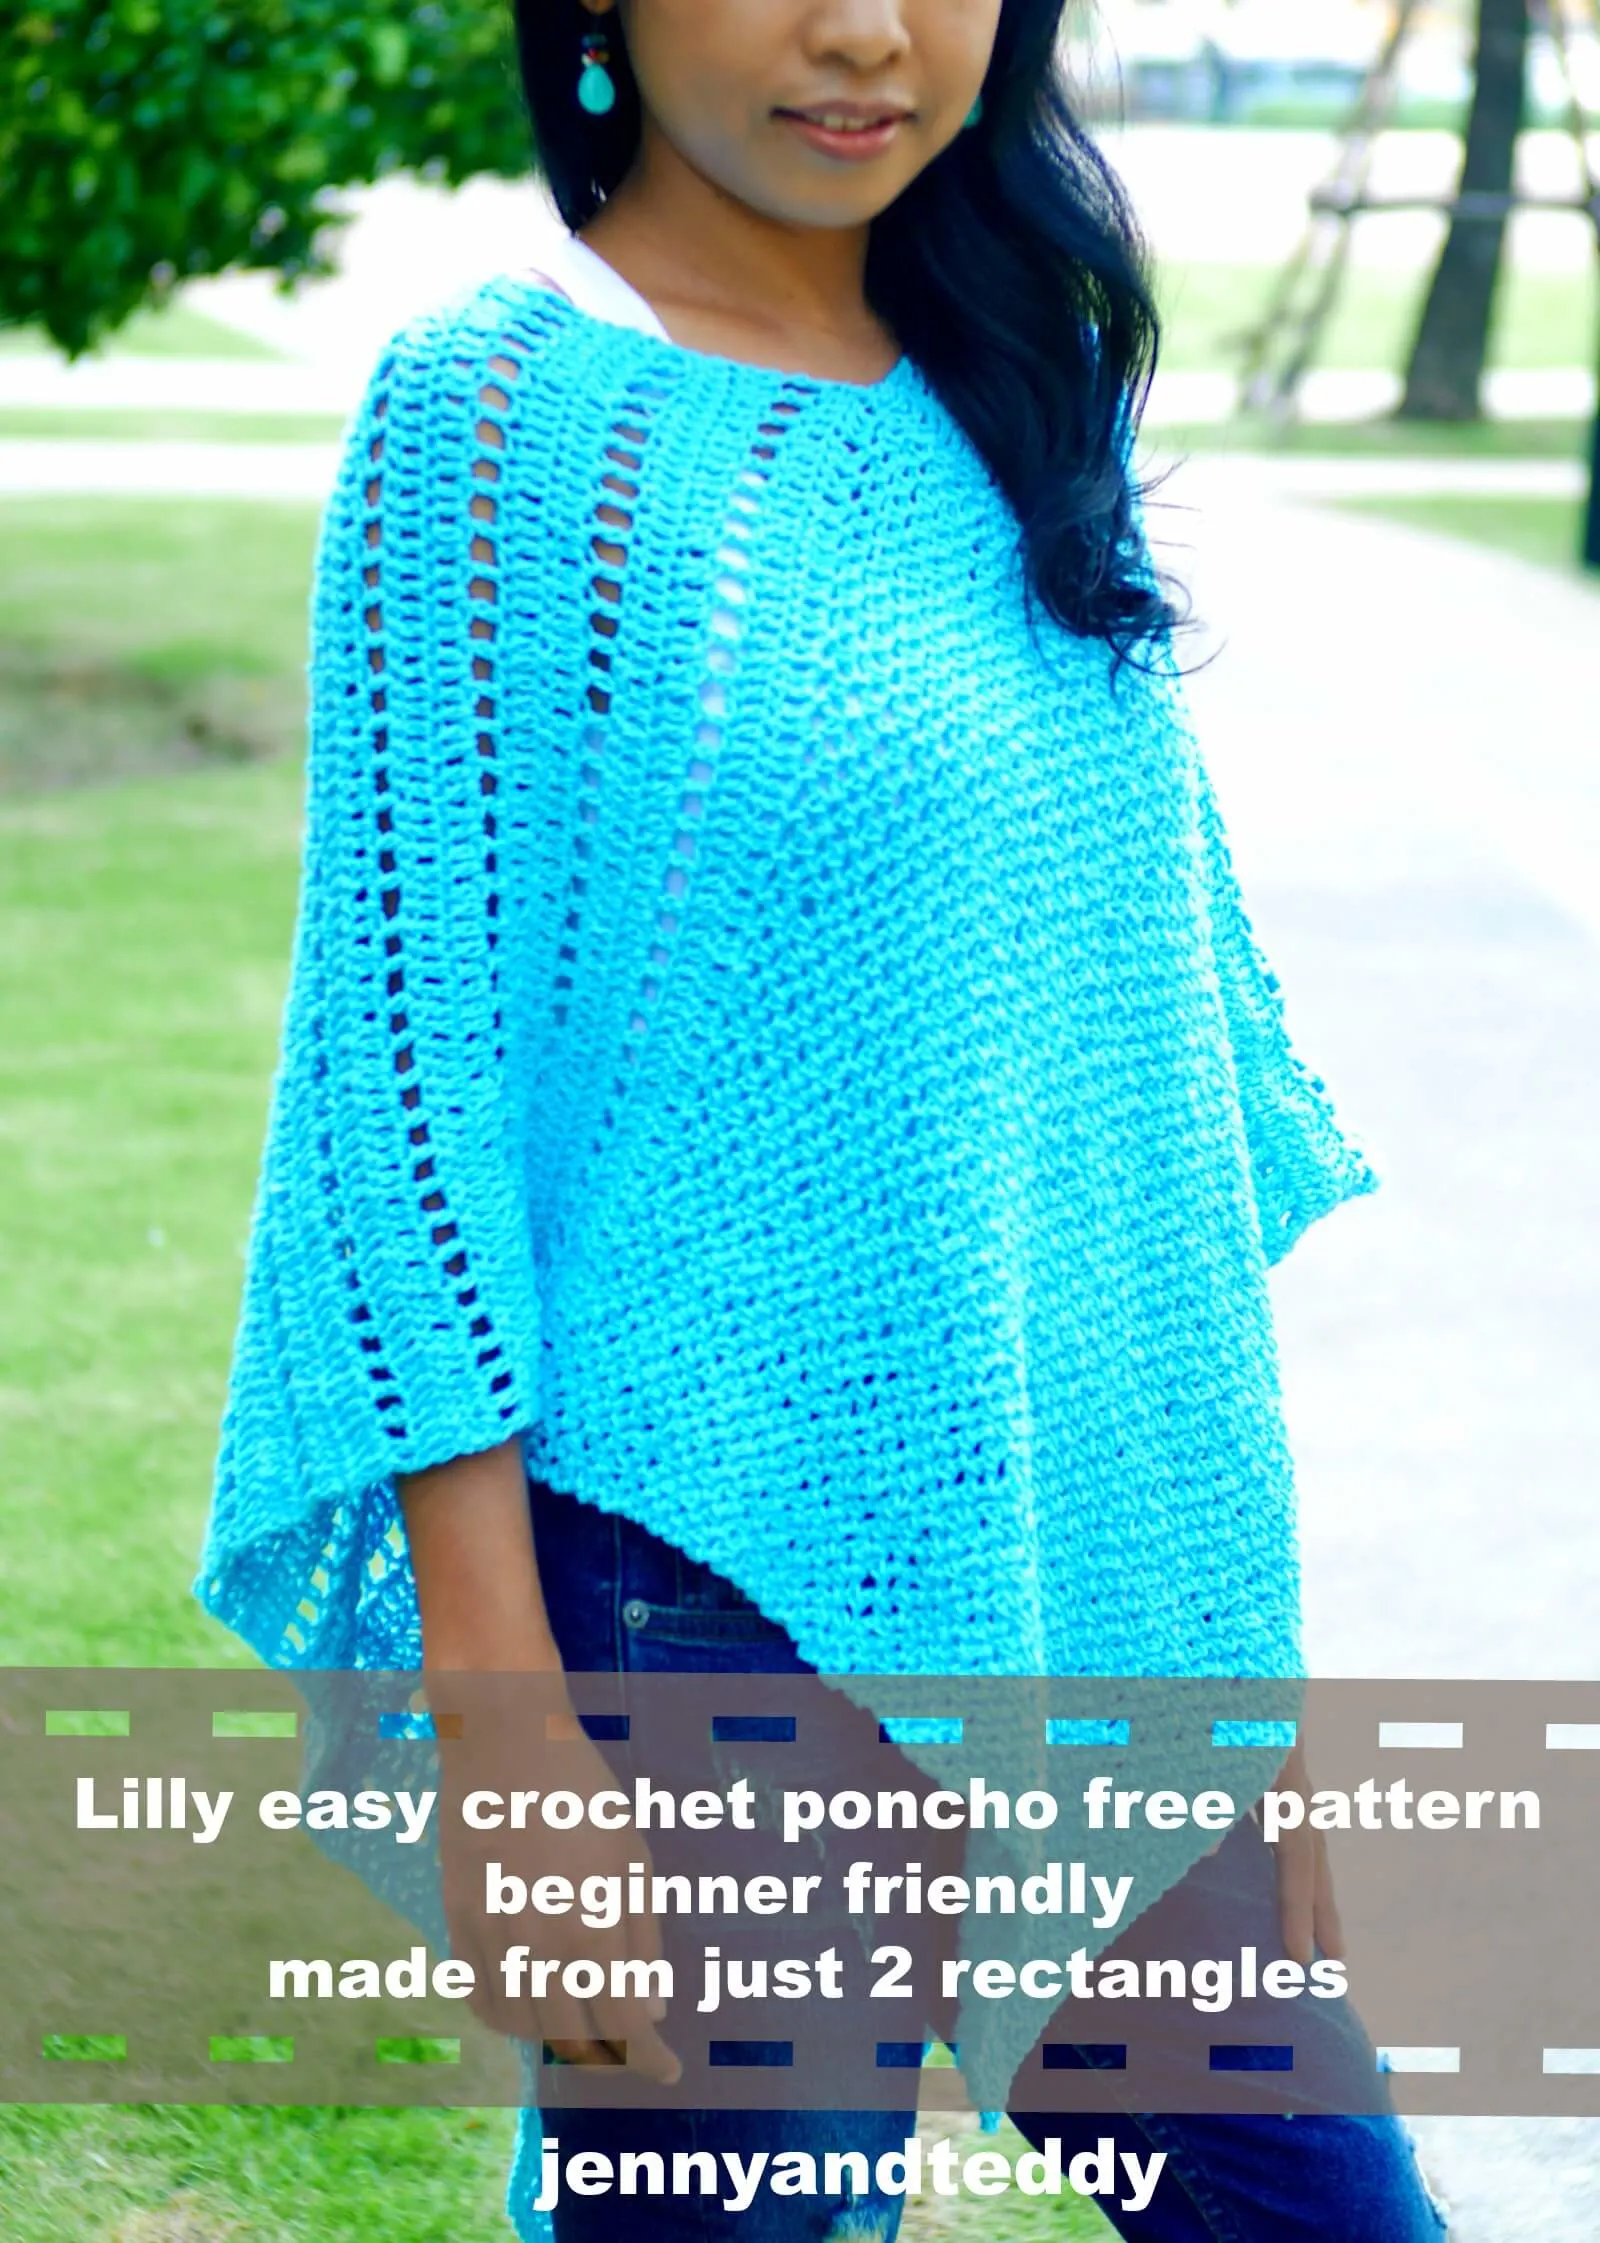 lilly easy crocht poncho photo free pattern